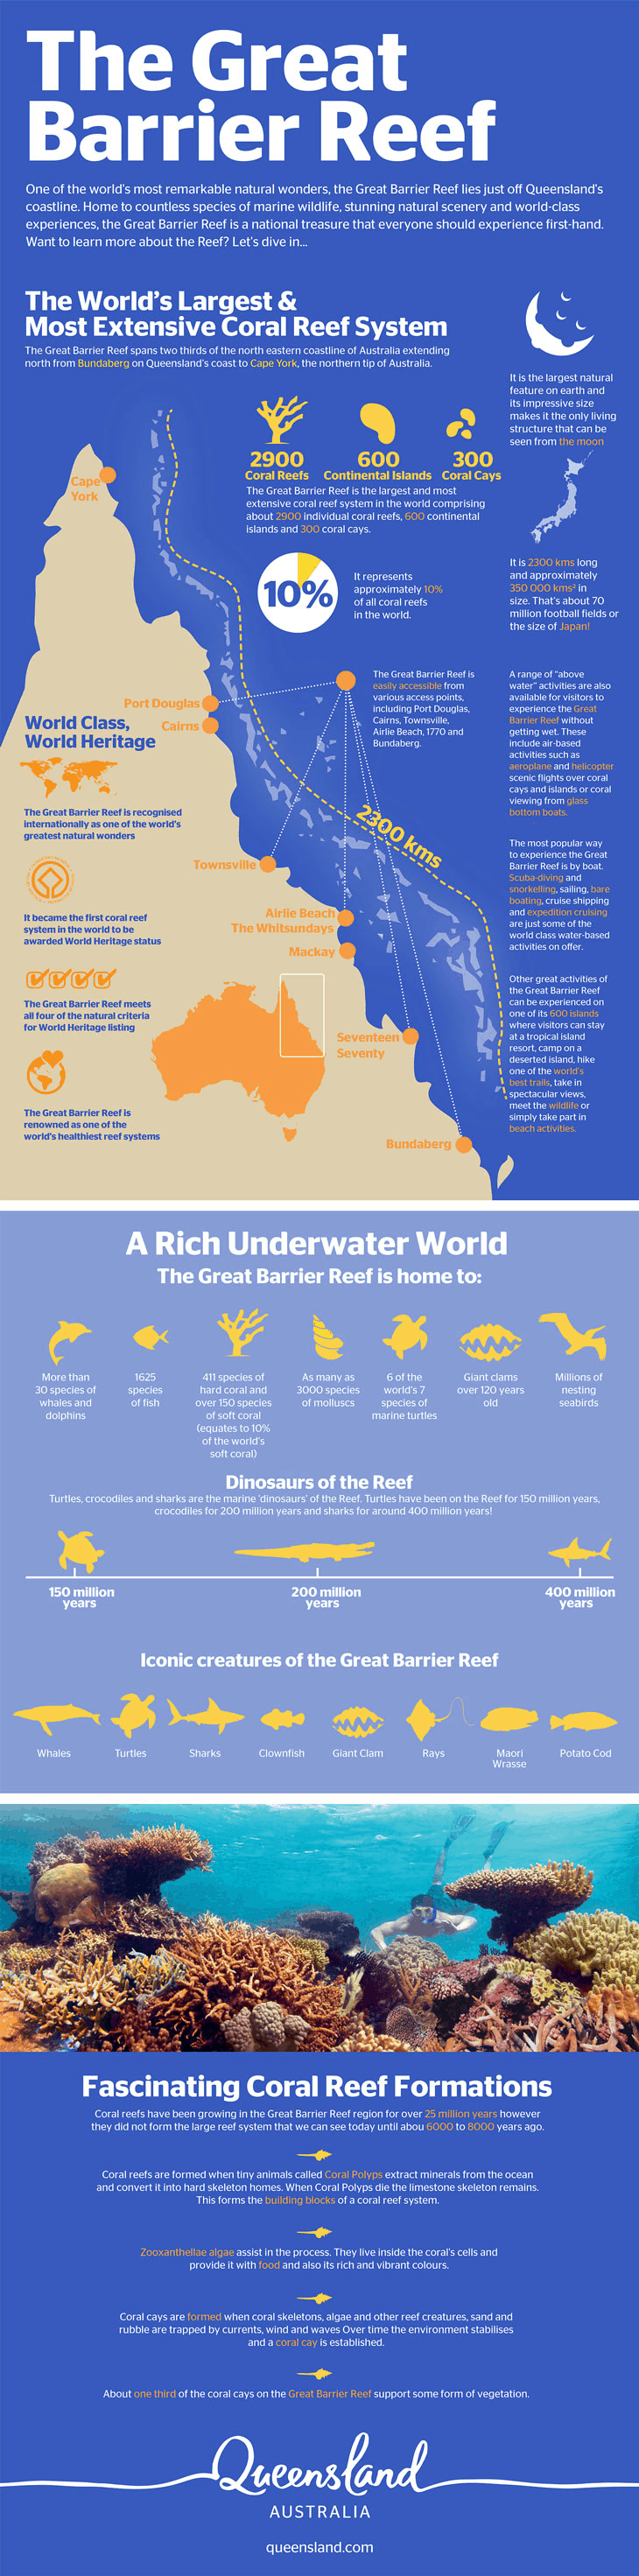 Great-Barrier-Reef-Infographic-v2